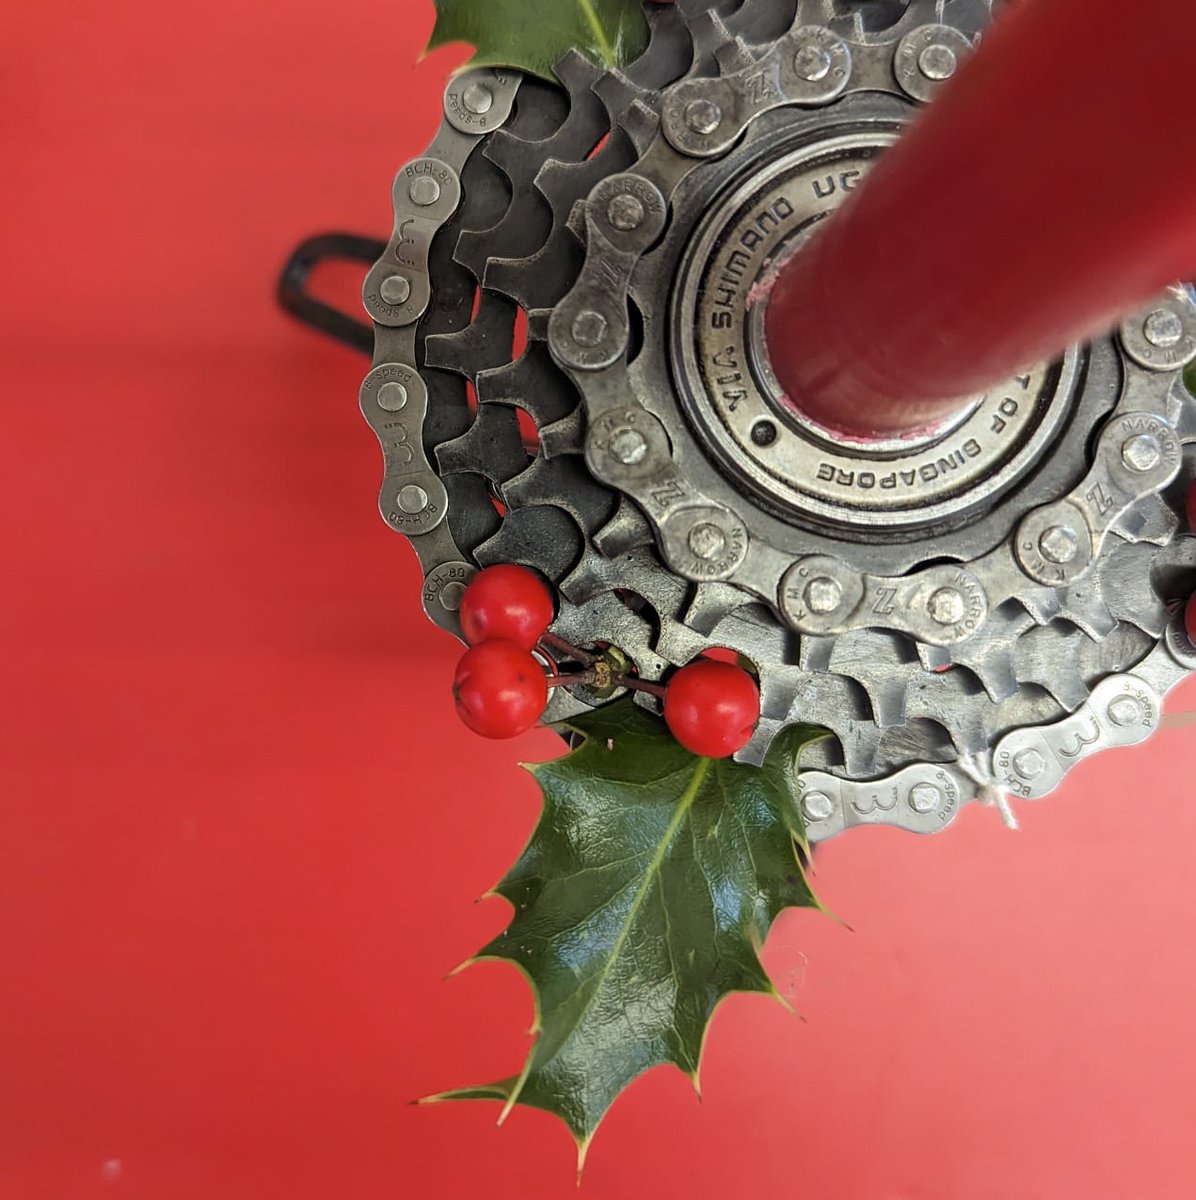 Check out our new upcycled candlestick holders, crafted in #RediscoverCycling! Can you guess what parts of the bike they're made from? Explore these and more at our #Sustainable #ChristmasFair this Saturday: ow.ly/PILV50QbszN